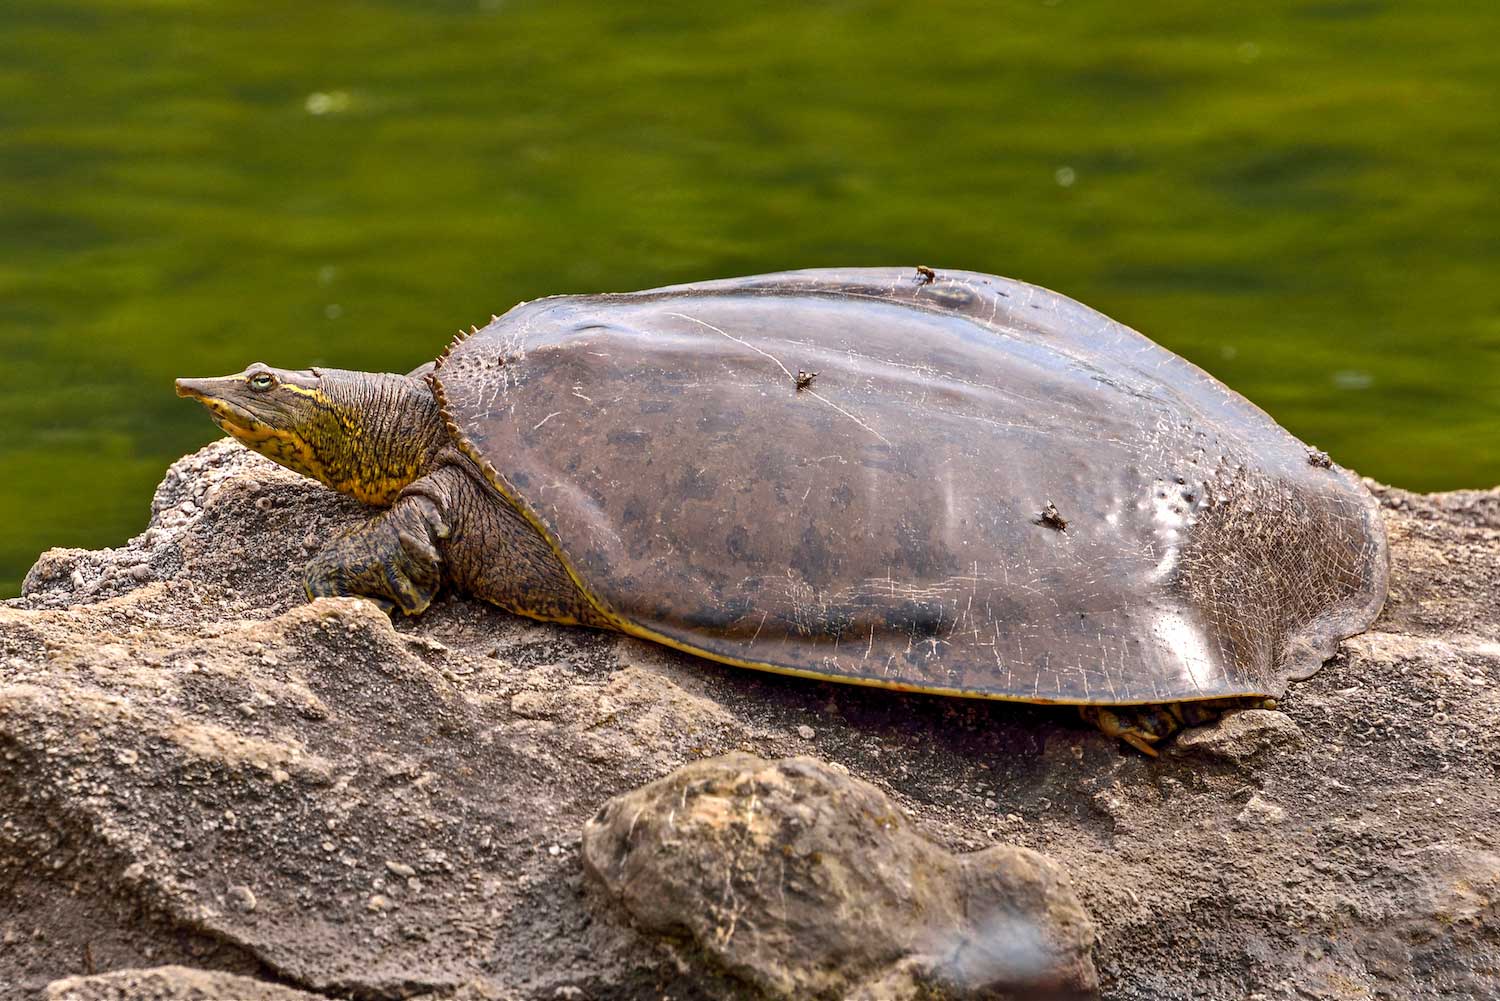 Creature feature: The more vulnerable spiny softshell turtle